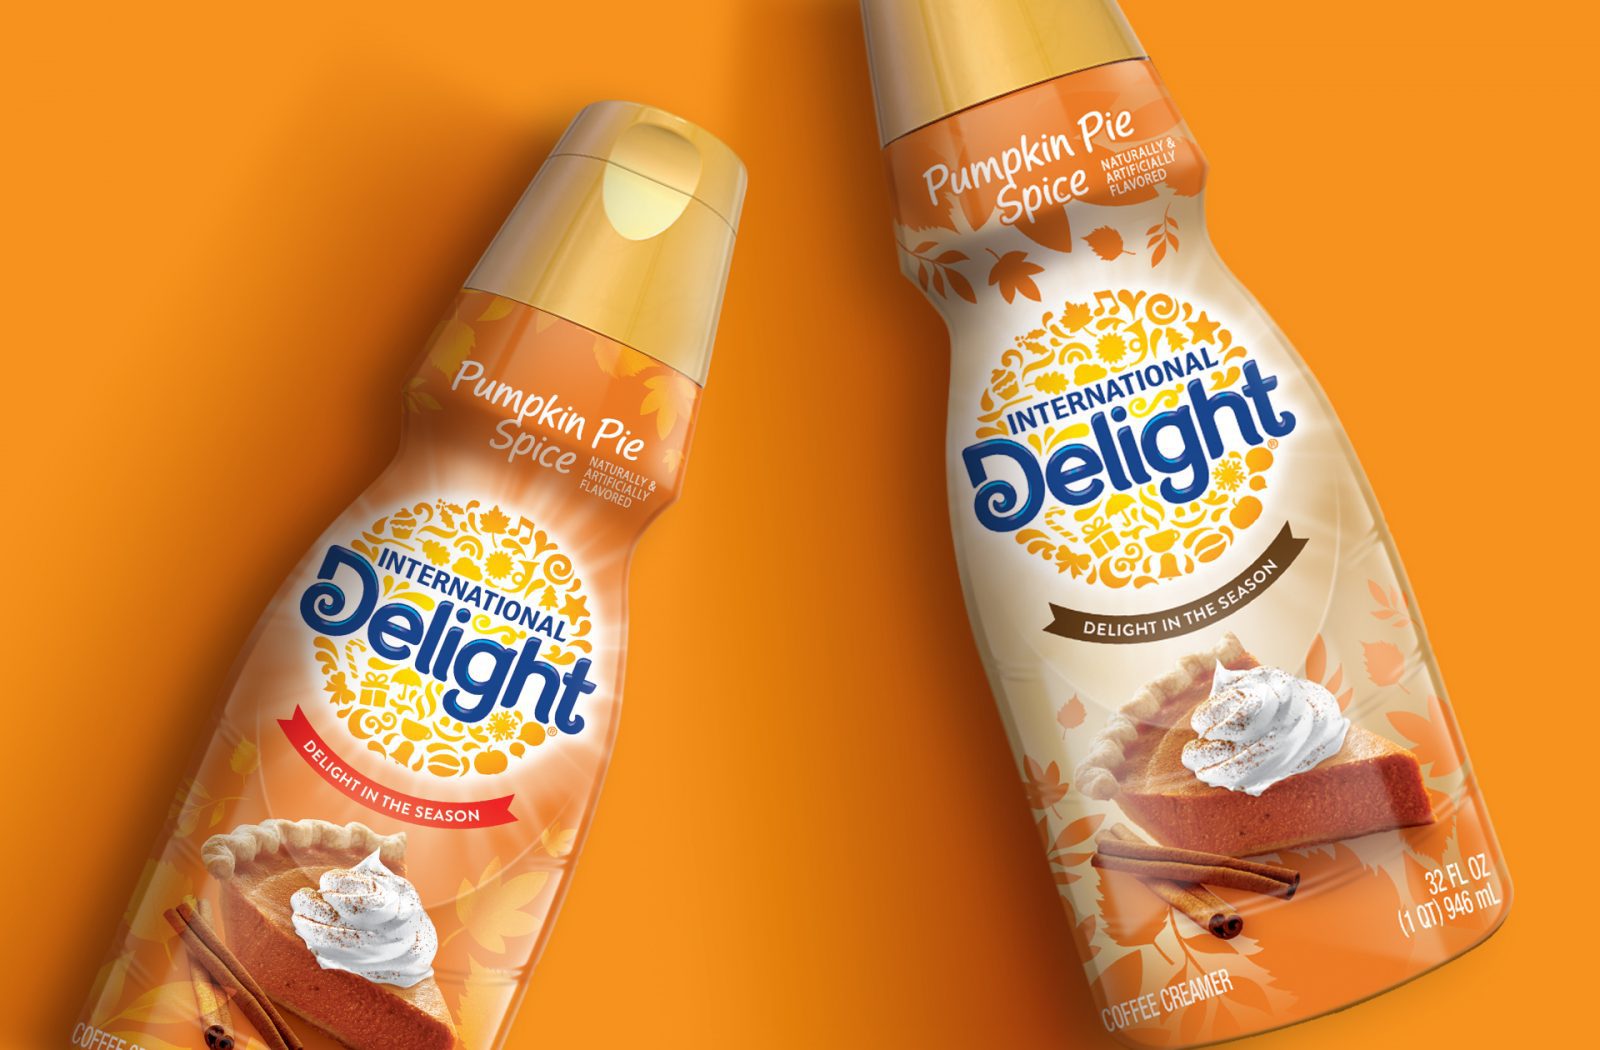 Product photography of two pumpkin spice seasonal variant for international delight coffee creamer, showcasing Cpg packaging design services.